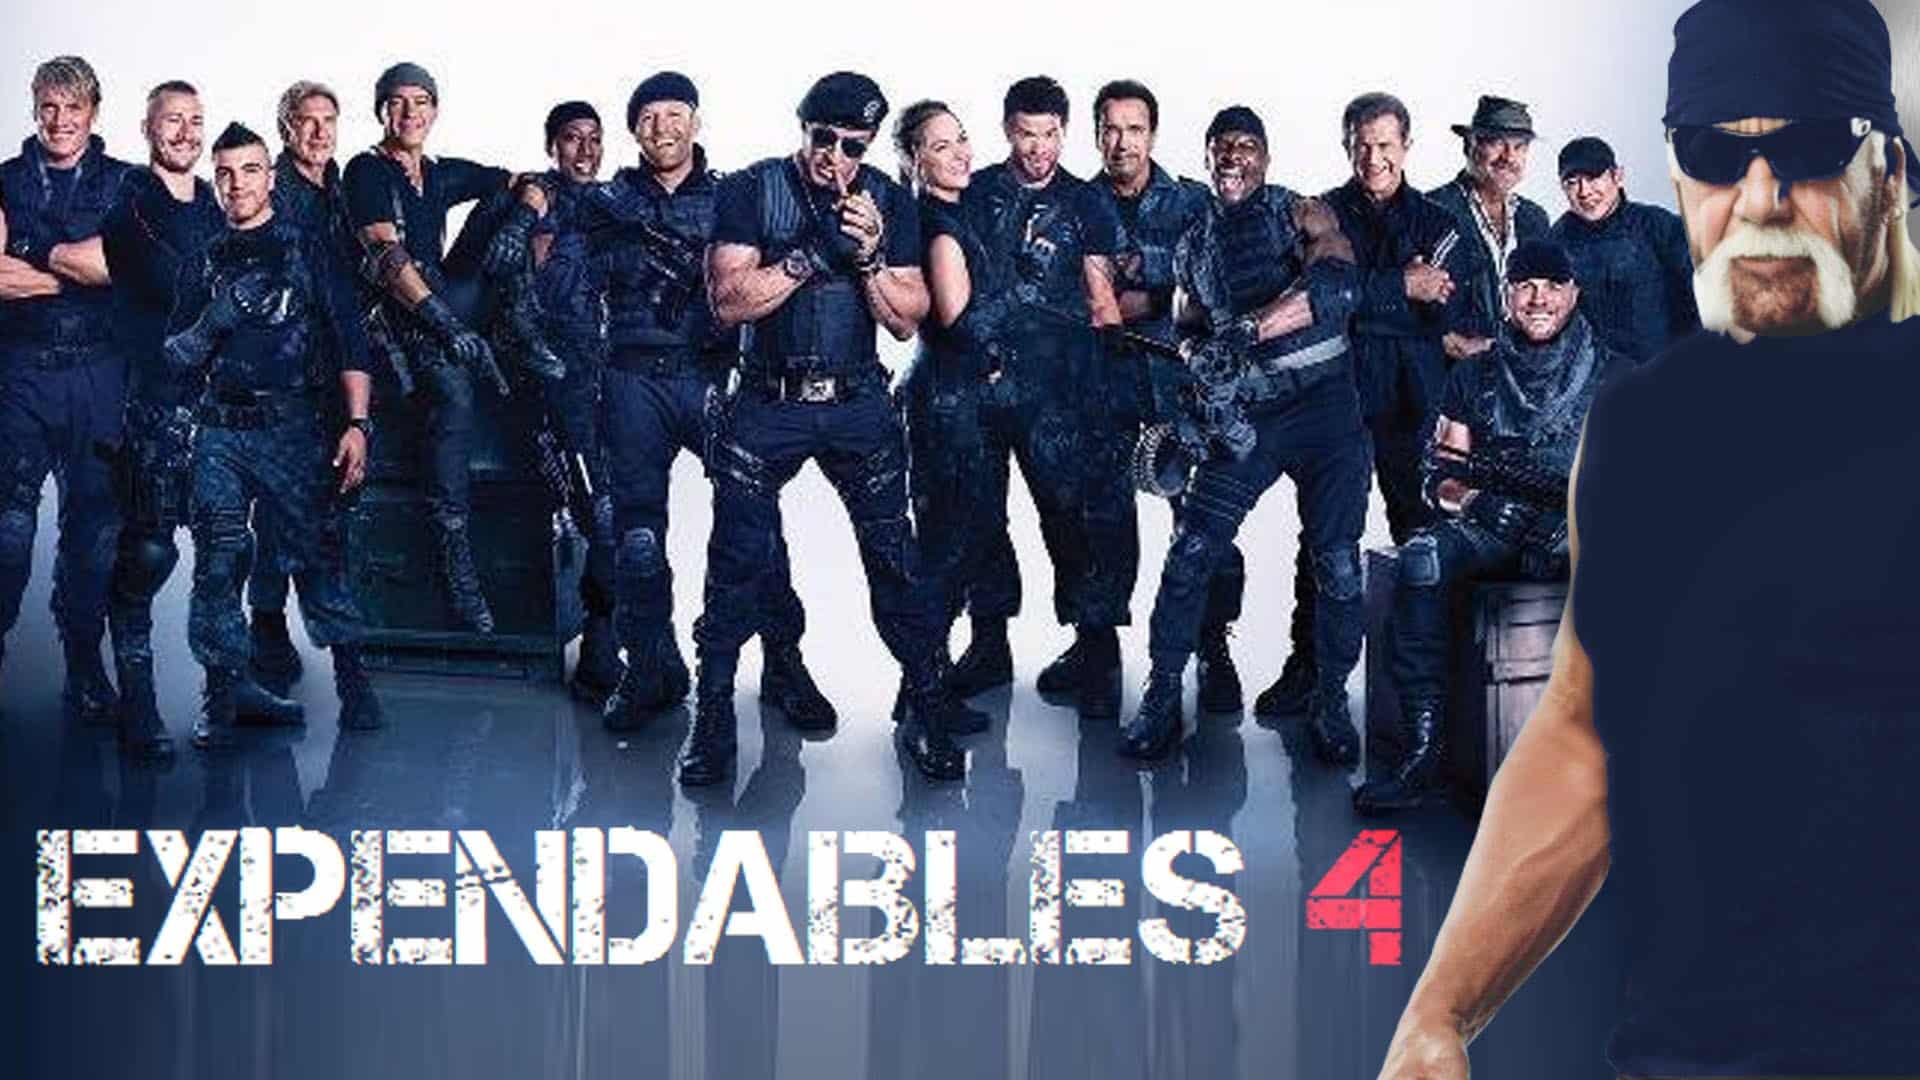 The Expendables 4 - Download movies 2022 - Free new movies